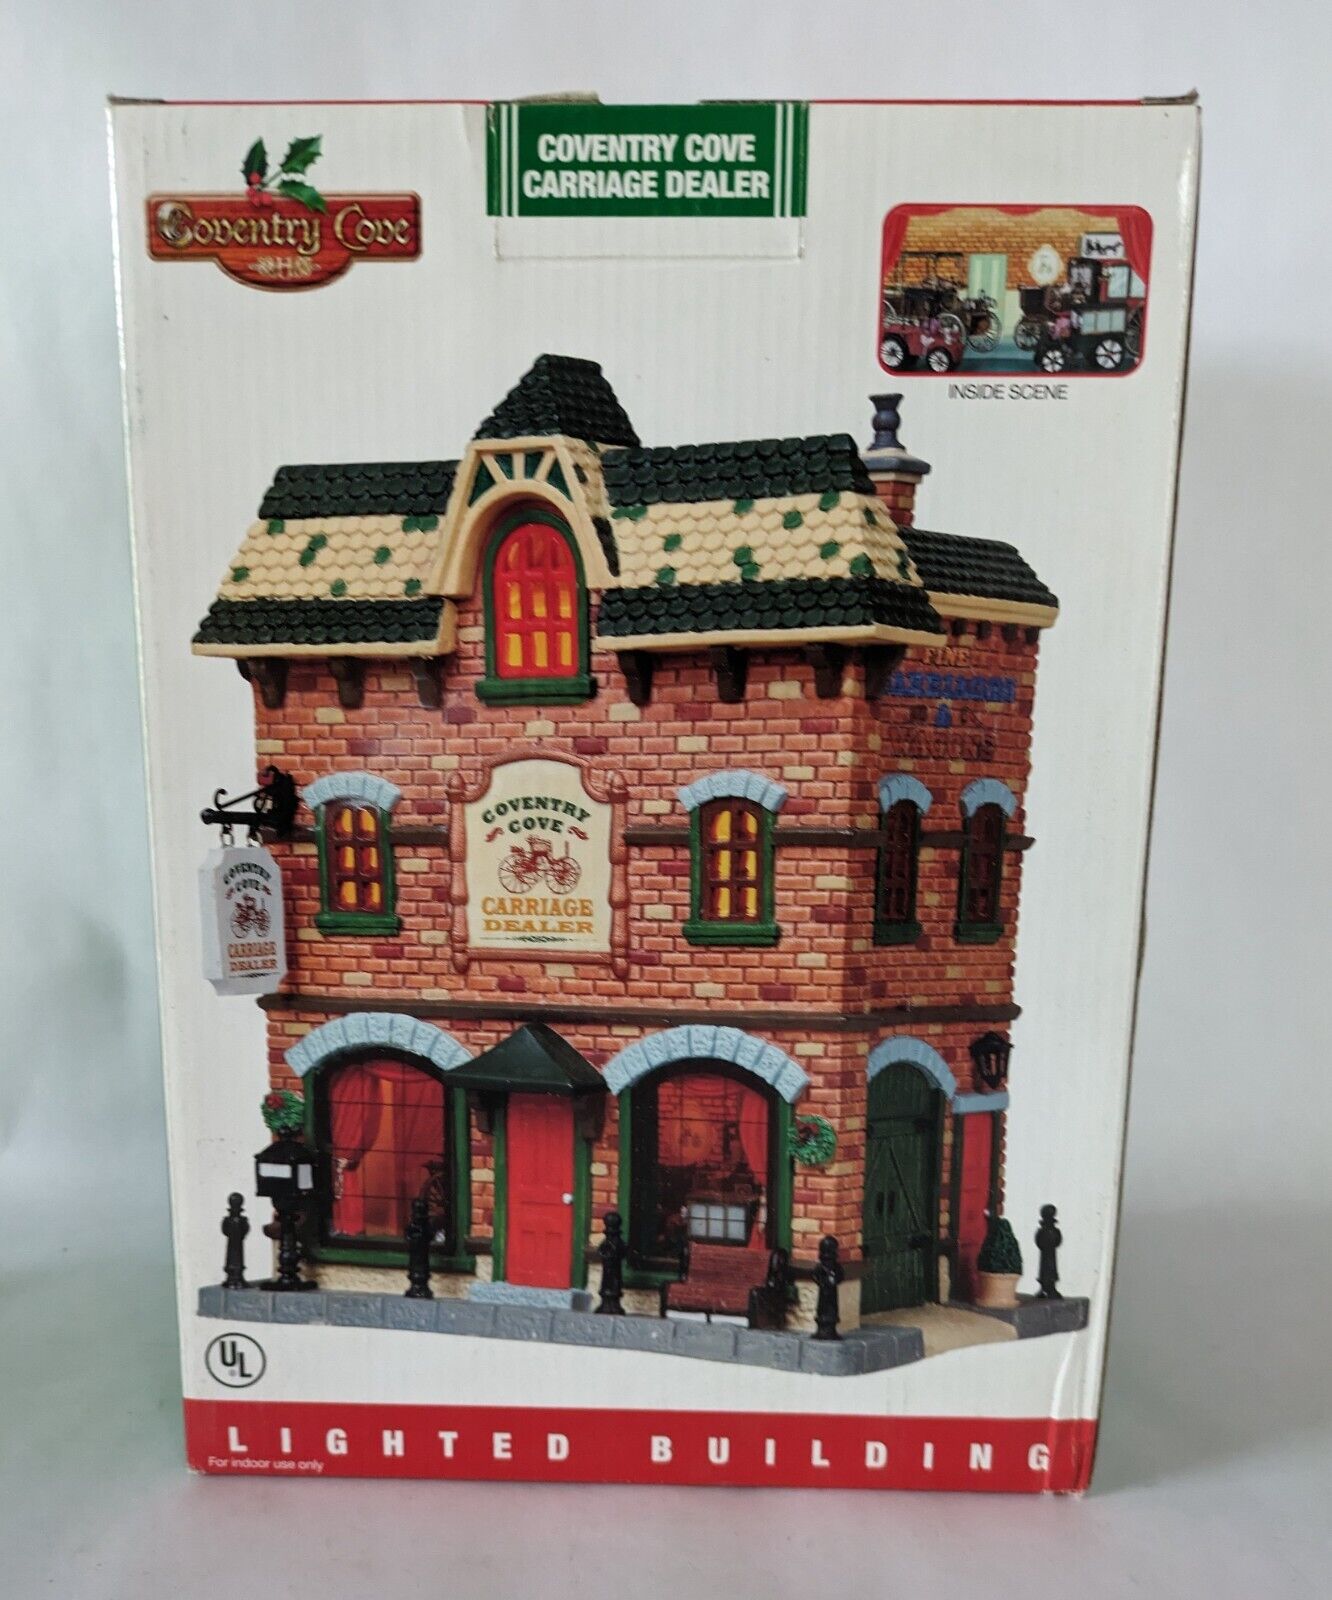 2009 Lemax Coventry Cove Carriage Dealer Lighted Building in Original Box